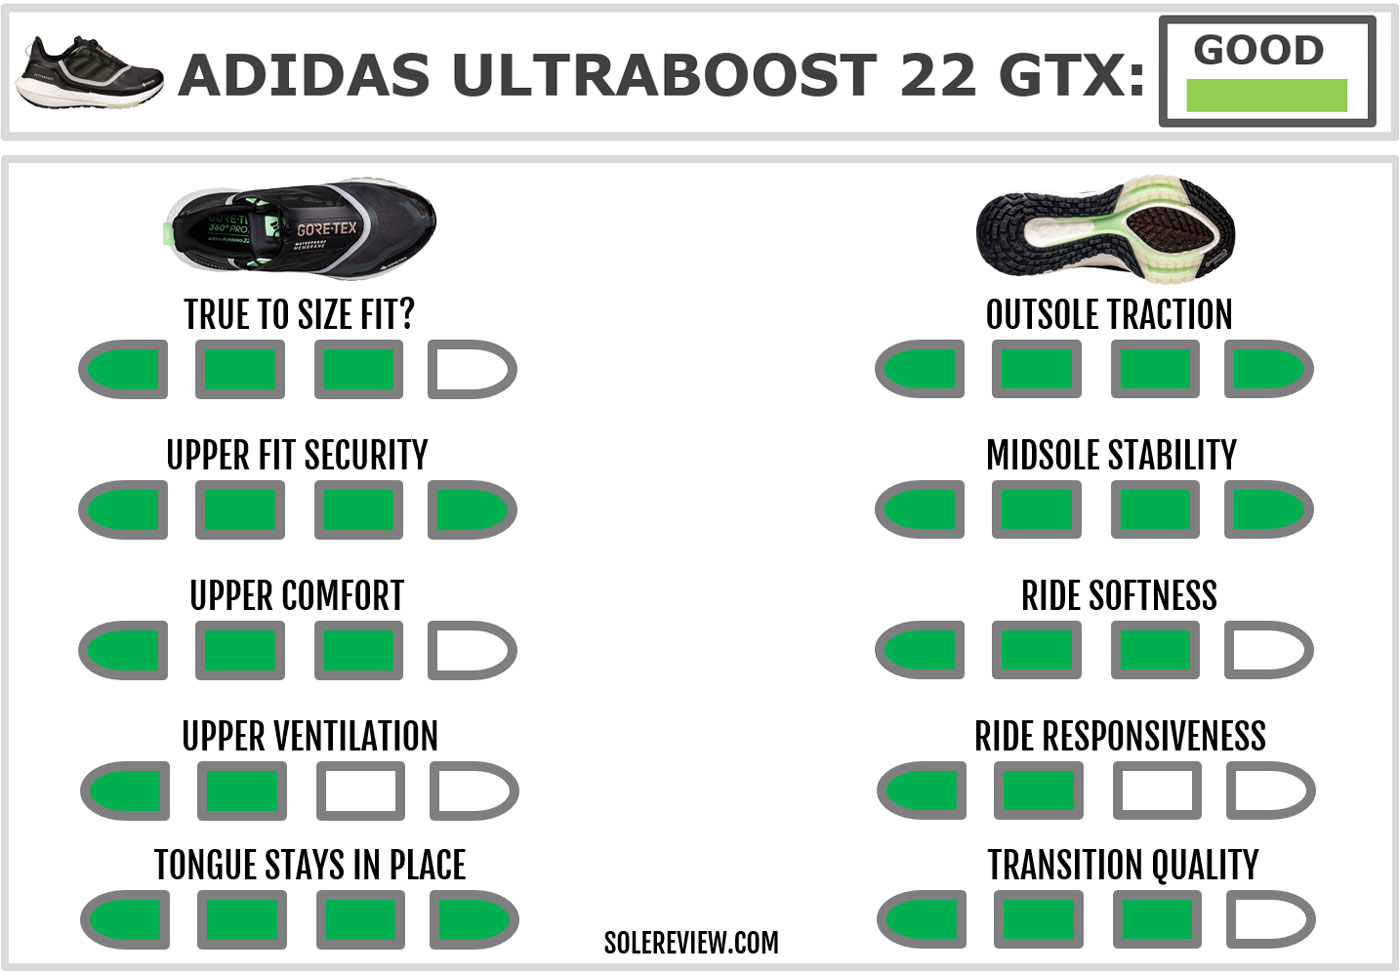 The overall score of the adidas Ultraboost 22 Gore-Tex.